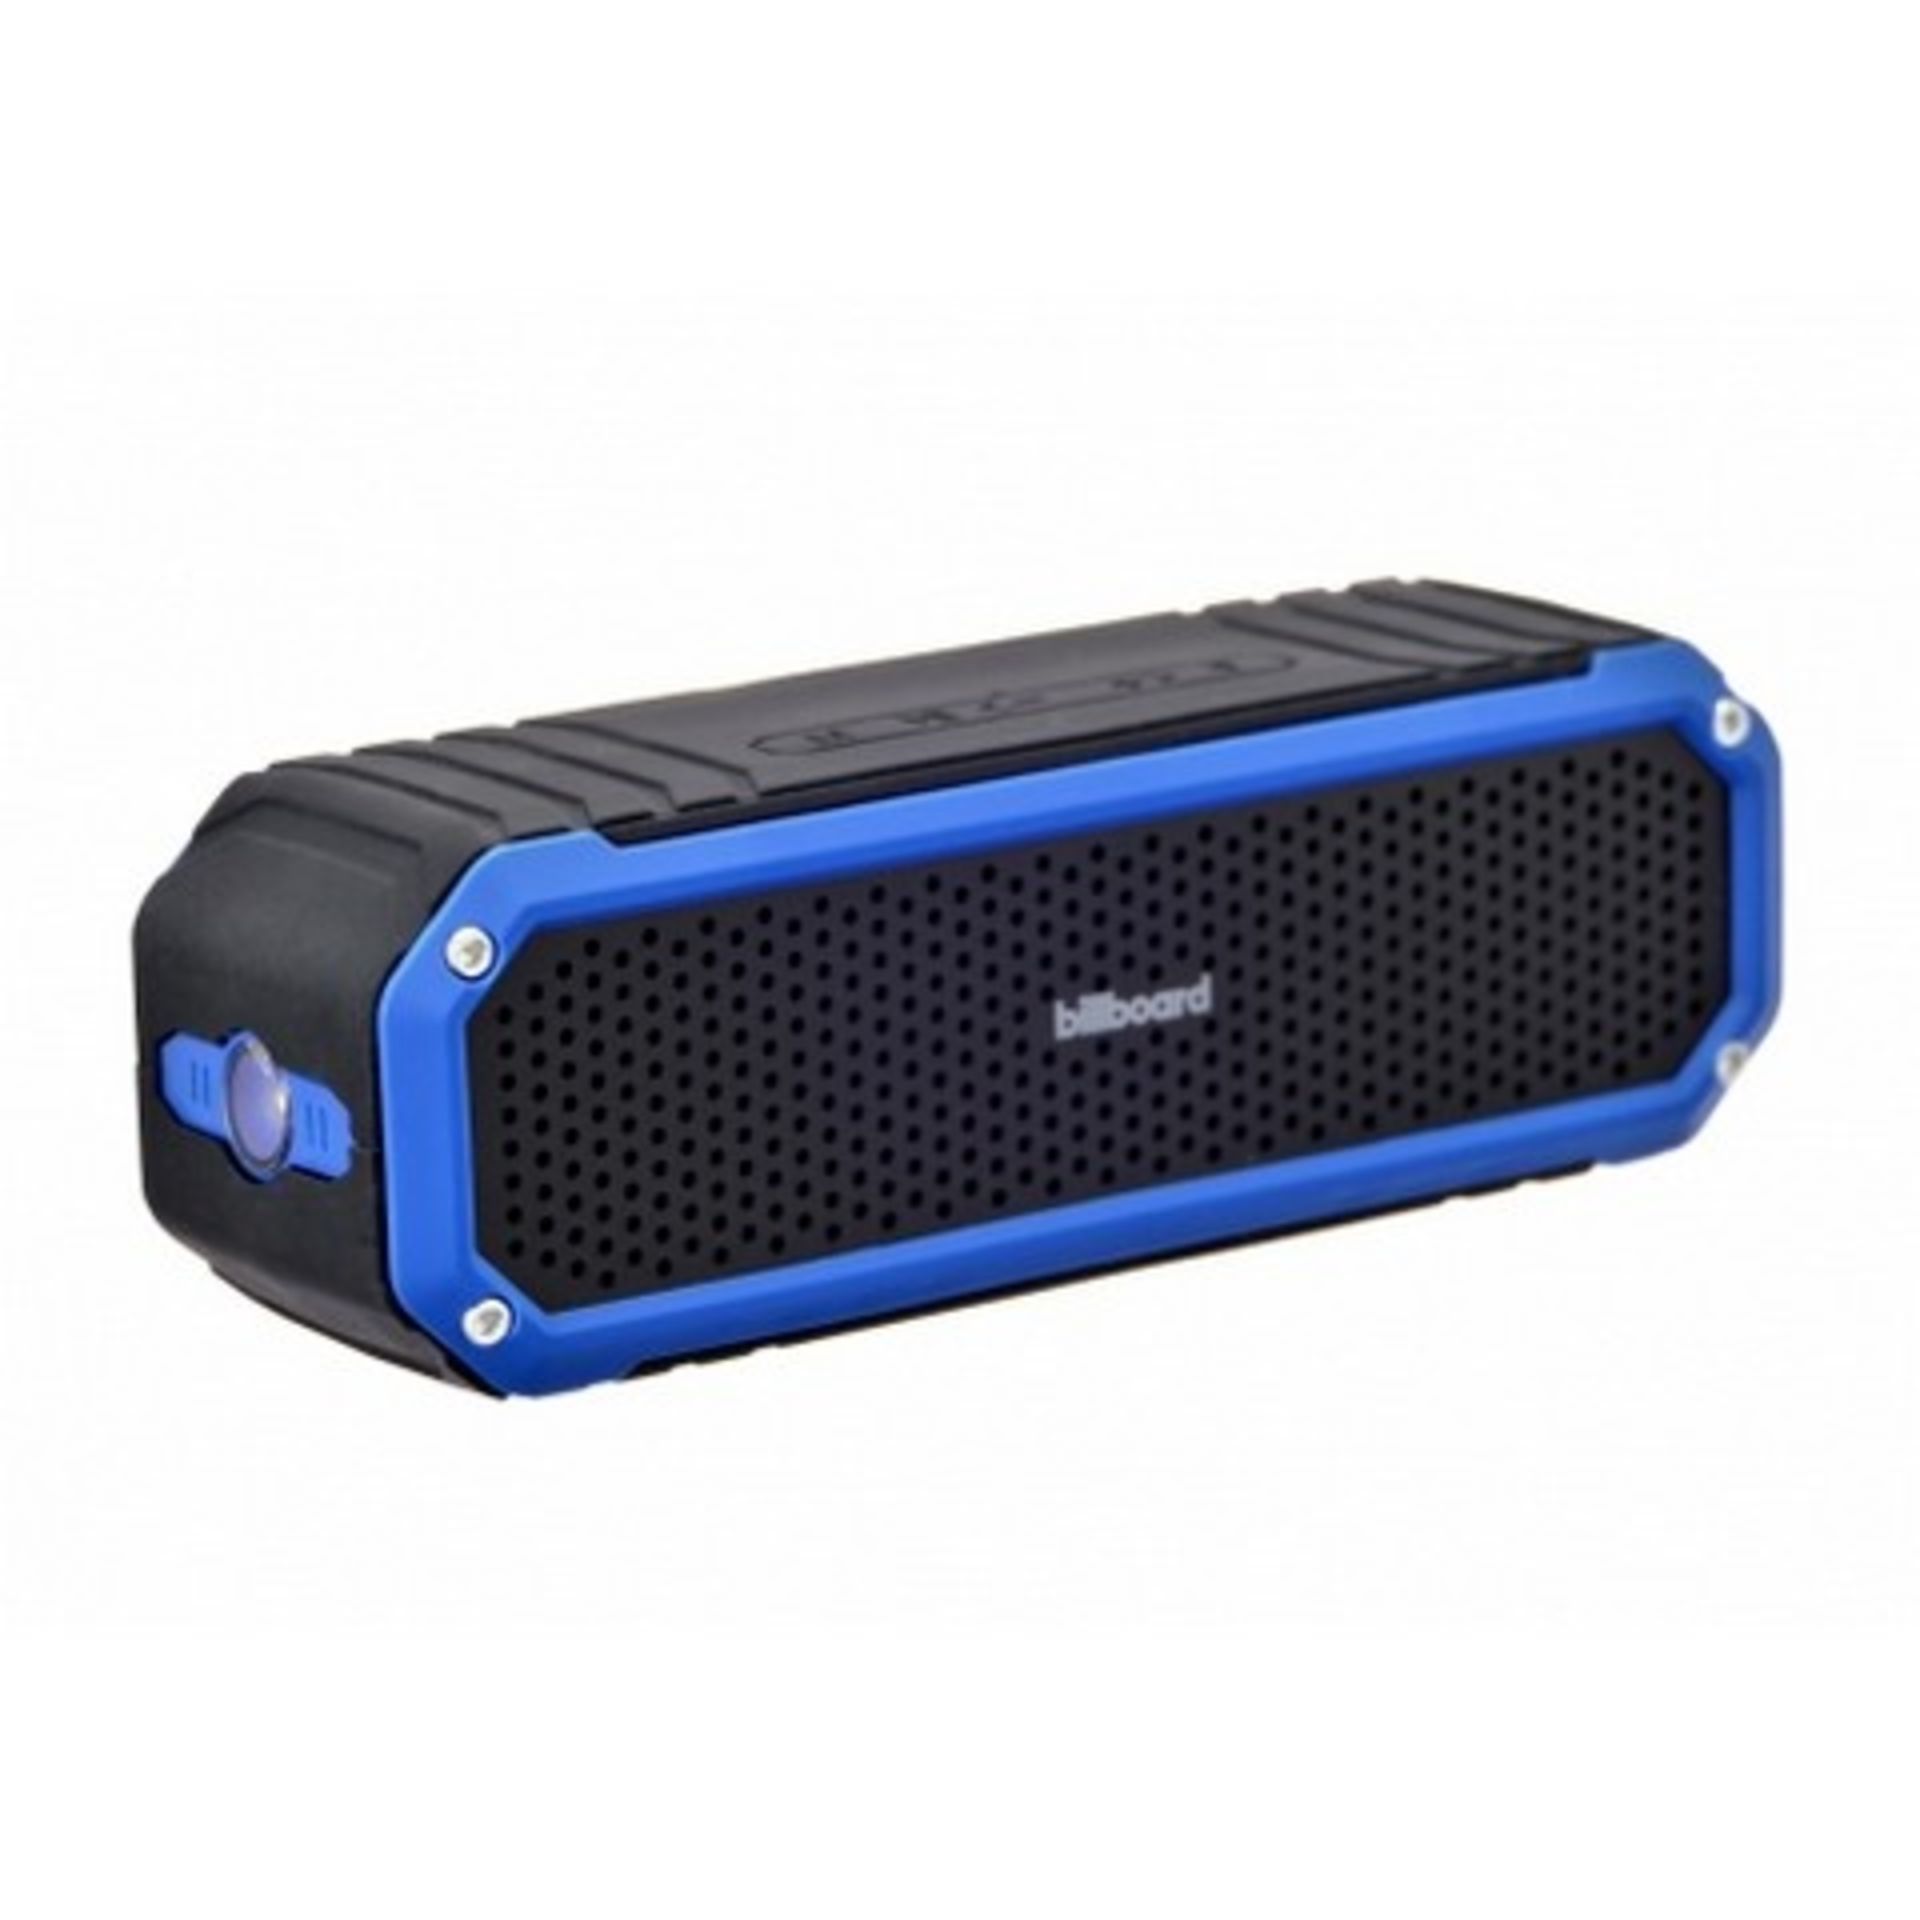 V Brand New Billboard Rugged Wireless Speaker - Soft Touch Silicon Body IPx Water Resistant Built In - Image 2 of 2